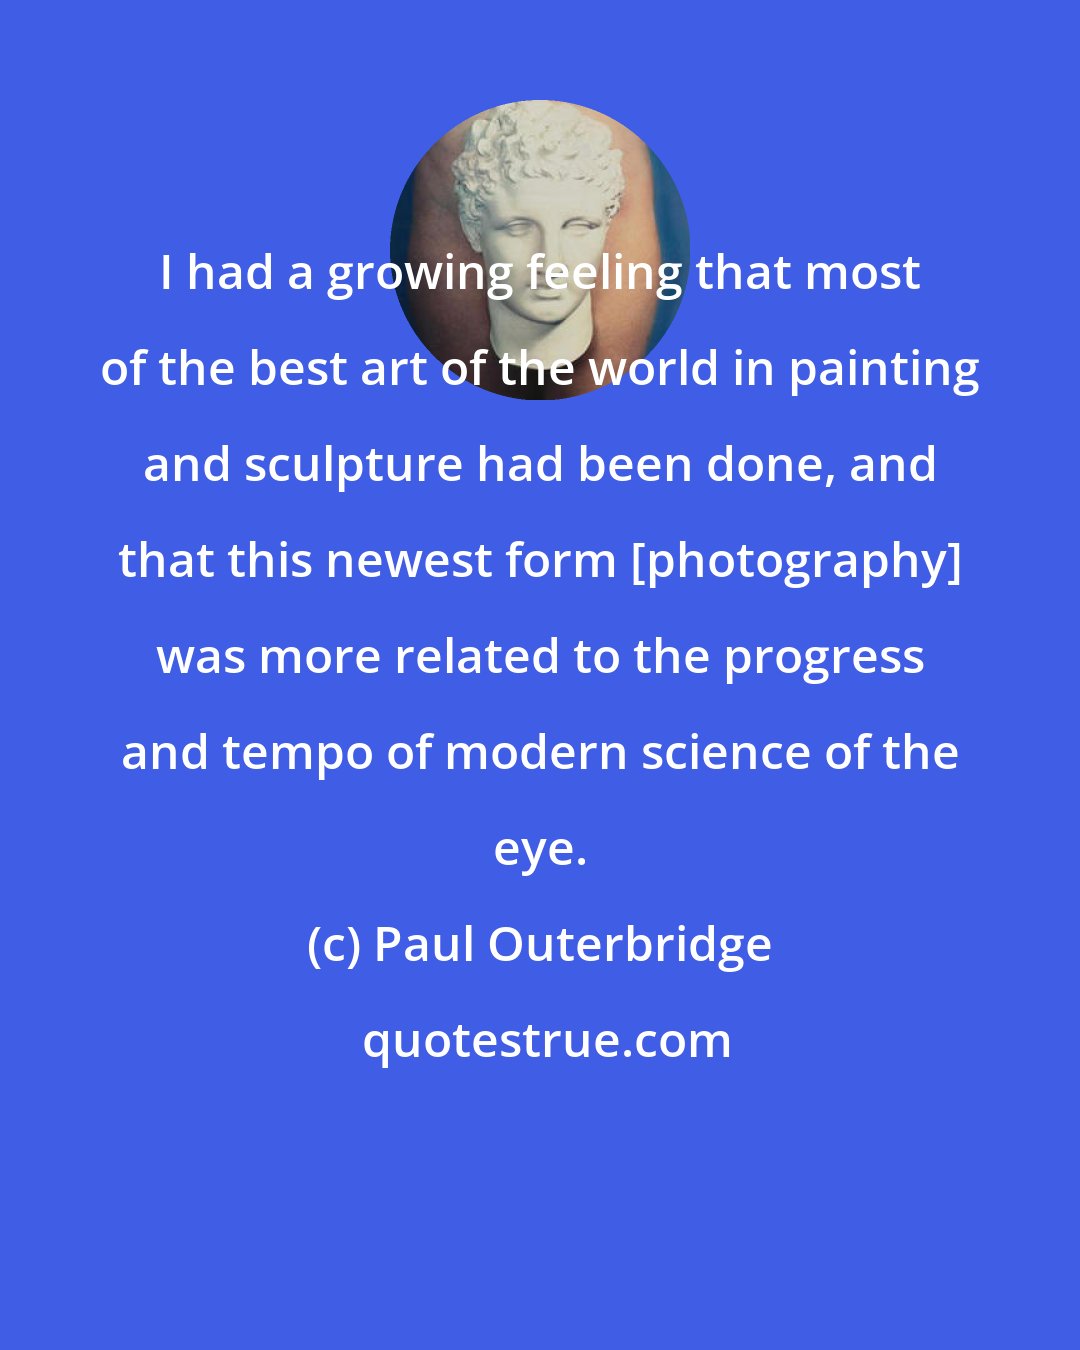 Paul Outerbridge: I had a growing feeling that most of the best art of the world in painting and sculpture had been done, and that this newest form [photography] was more related to the progress and tempo of modern science of the eye.